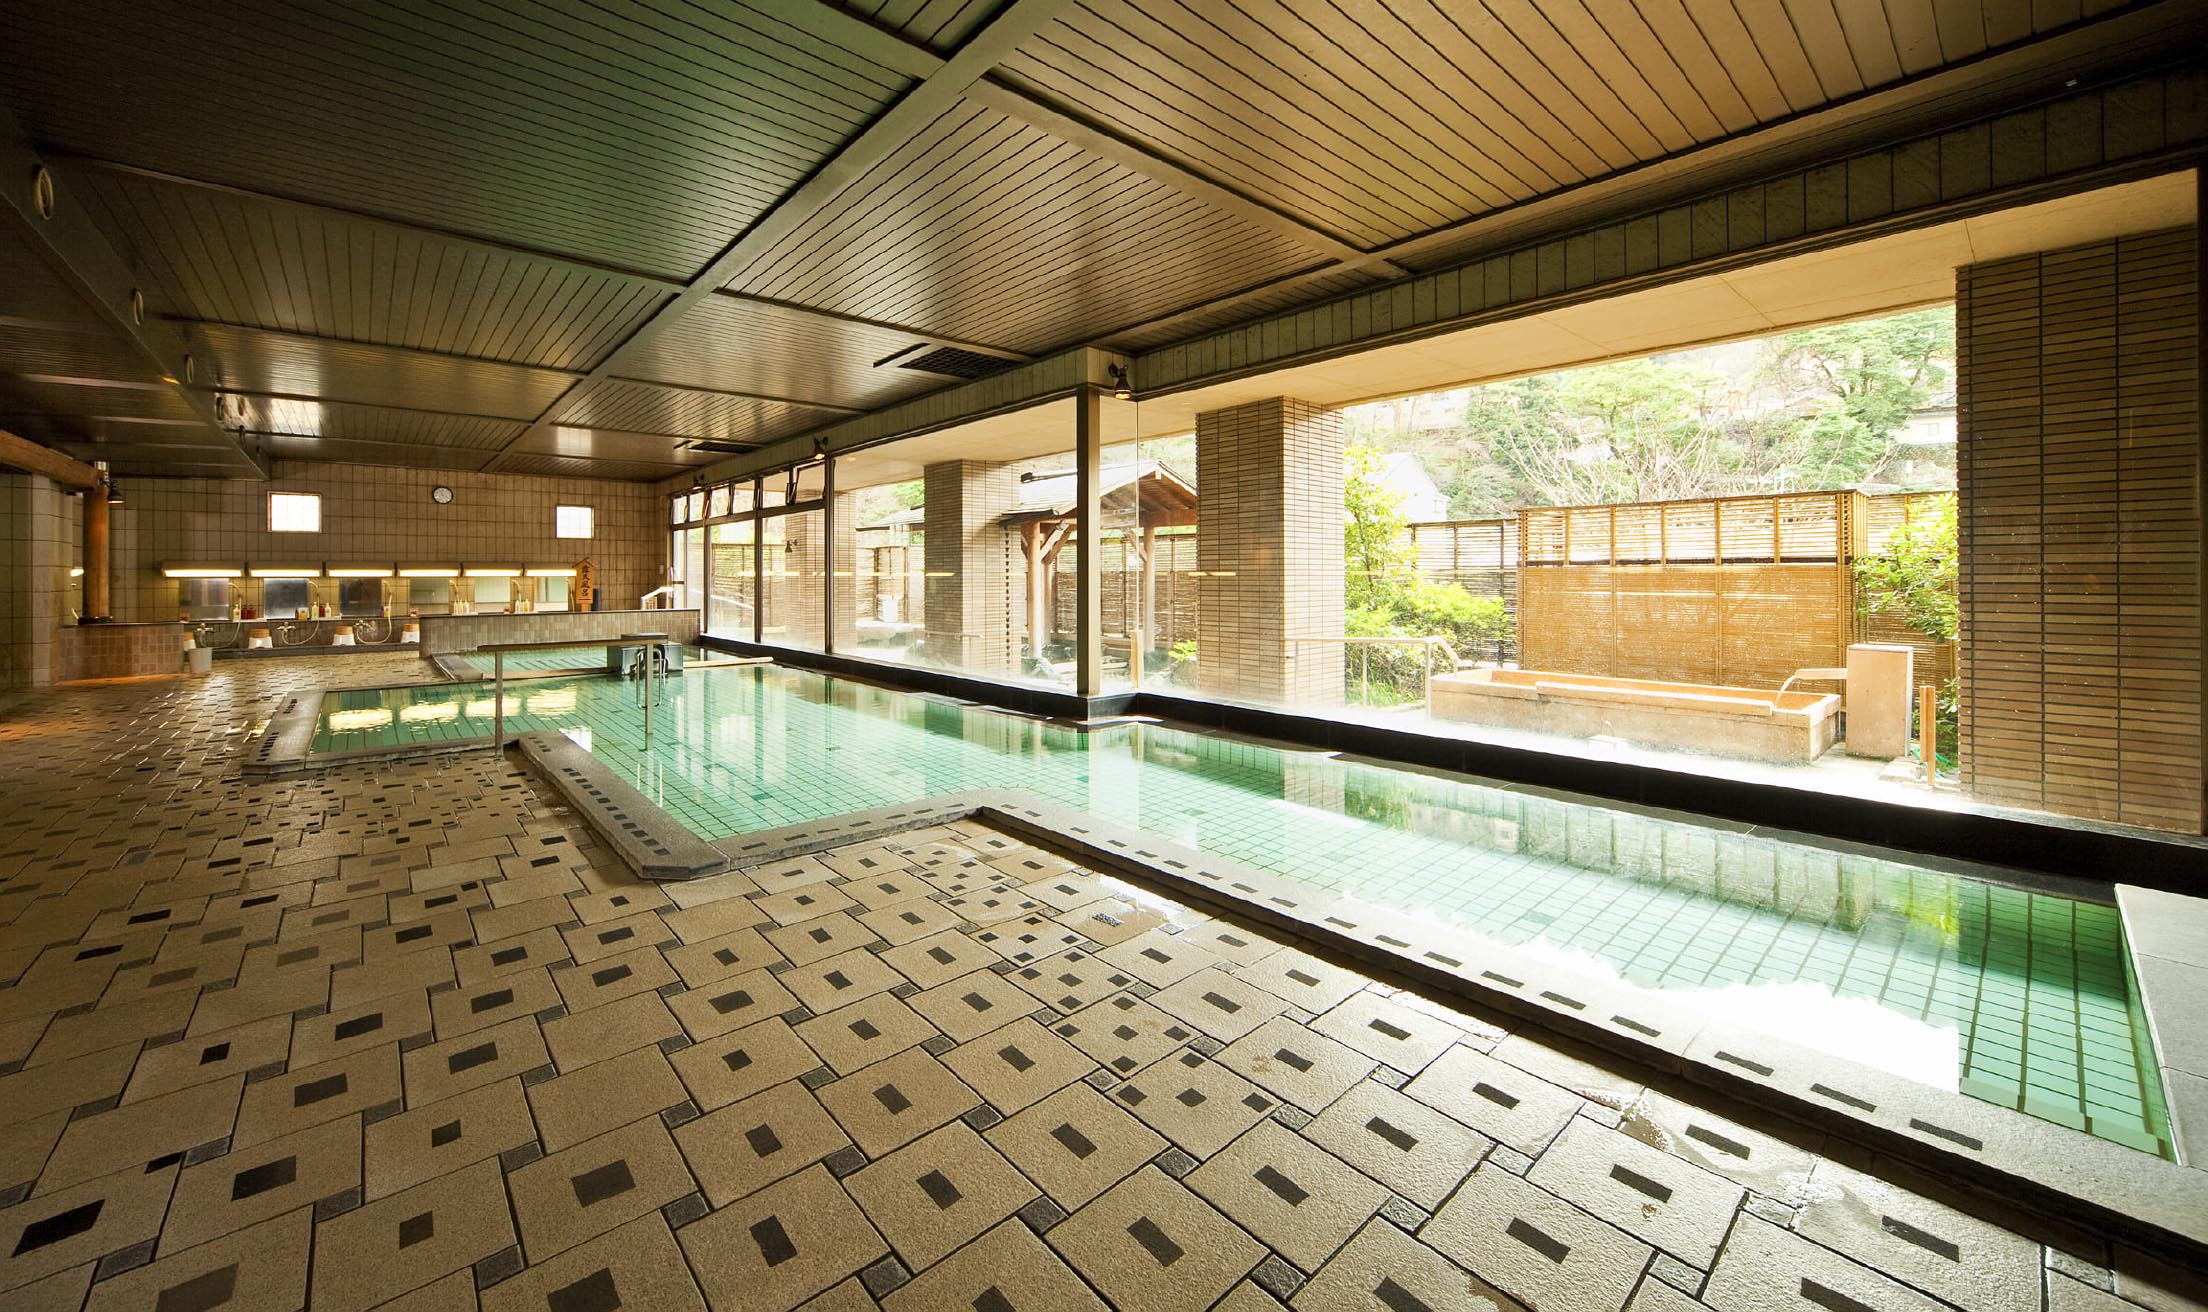 The airy, large bathing rooms can accommodate big groups.